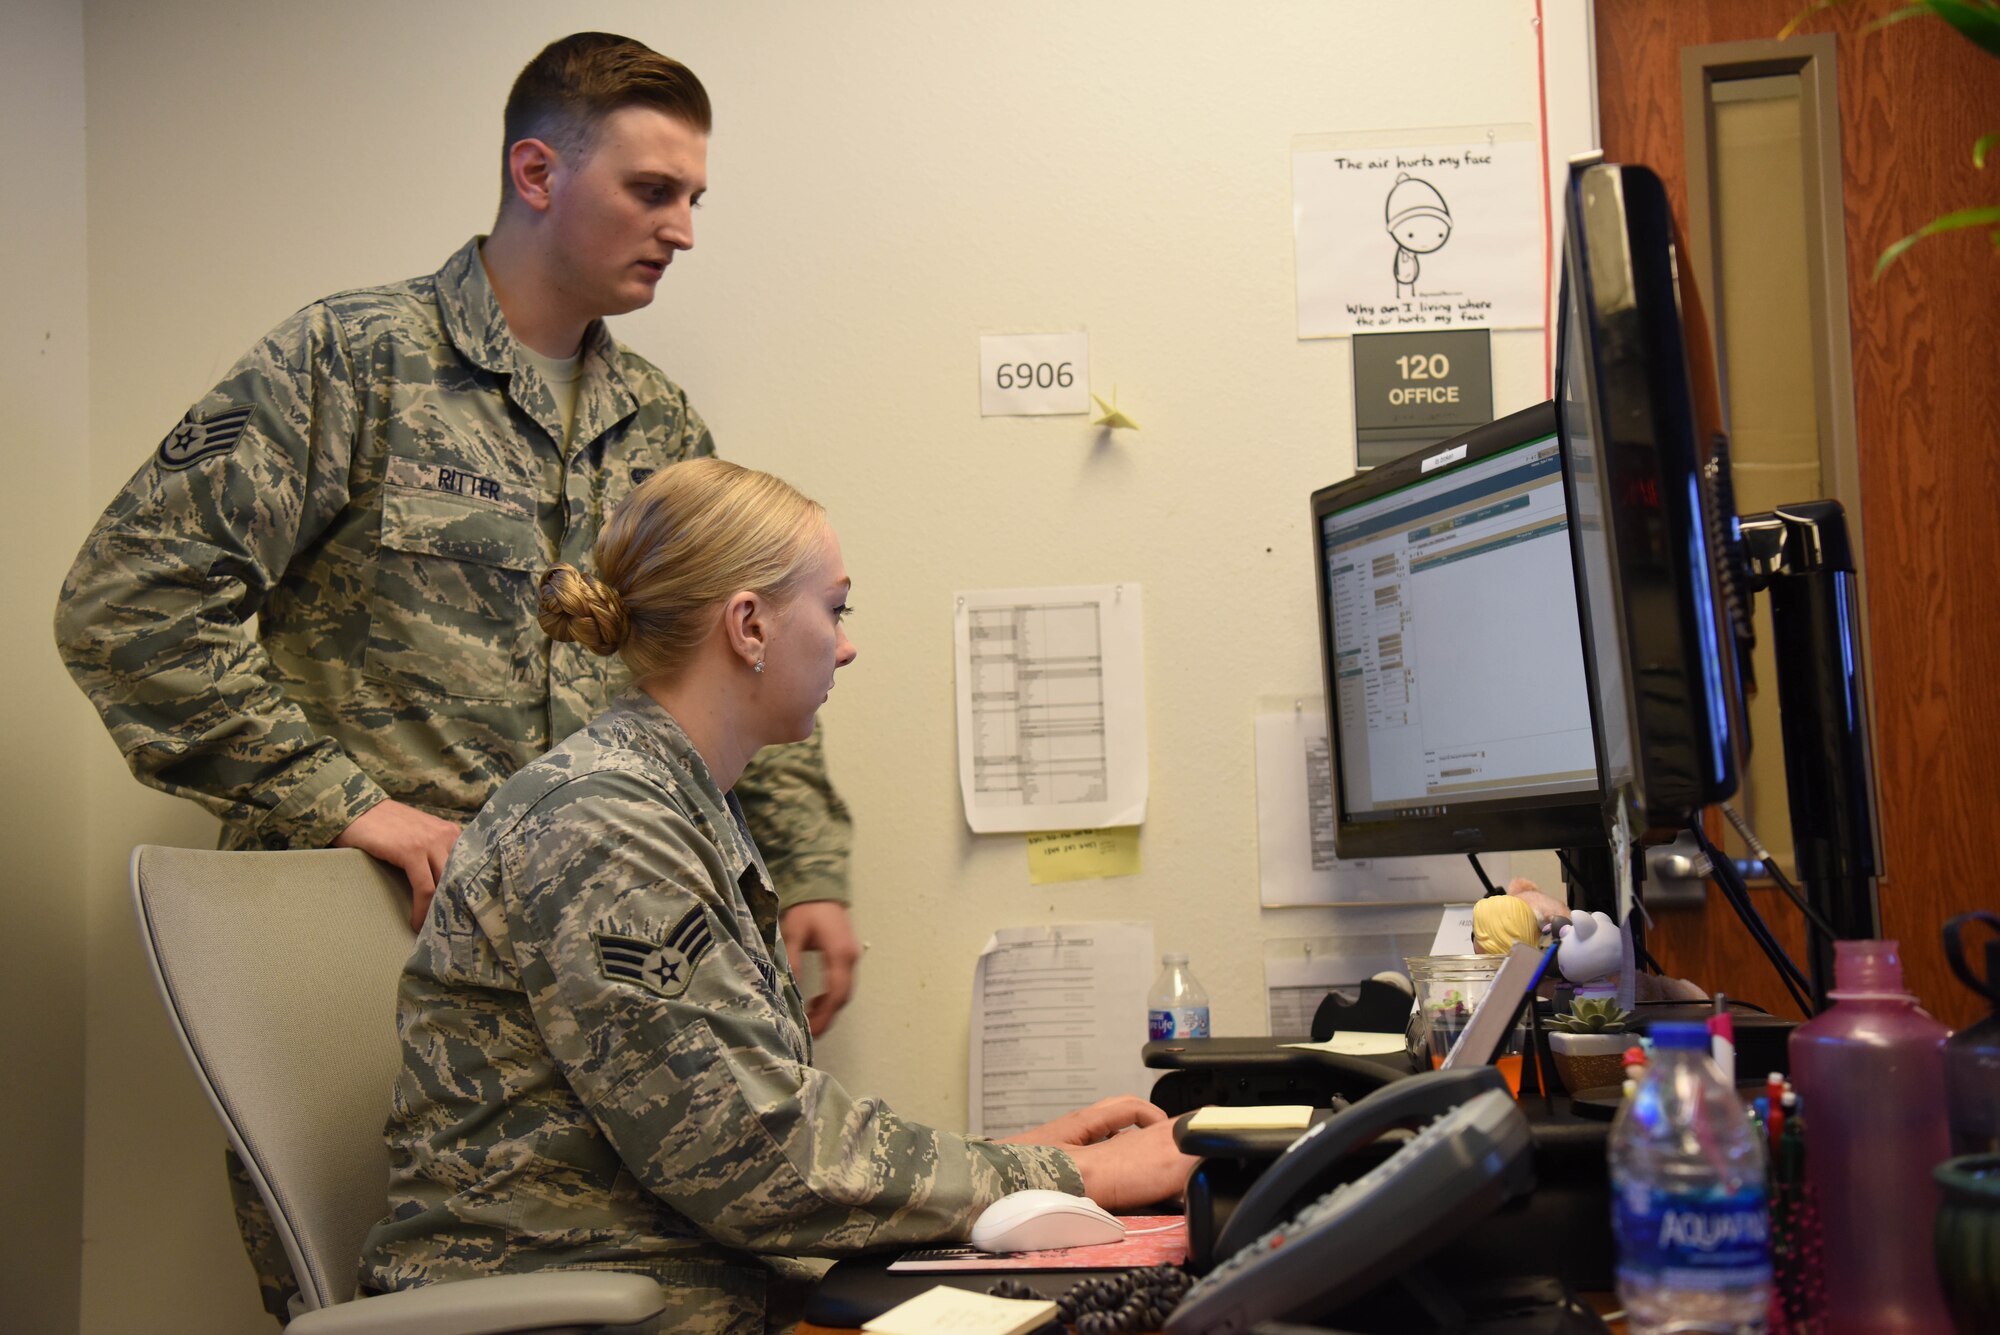 Senior Airman Skyler Vinay, a 28th Communications Squadron cyber transport systems technician and Staff Sgt. Sebastian Ritter, 28th CS Communications Focal Point noncommissioned officer in charge, inspect a computer during the Cyber Storm exercise at Ellsworth Air Force Base, S.D., May 14, 2018. Cyber Storm is in its second year and is used to help the 28th CS find cybersecurity weaknesses and be more effective in a cyber-contested environment. (U.S. Air Force photo by Airman 1st Class Thomas Karol)